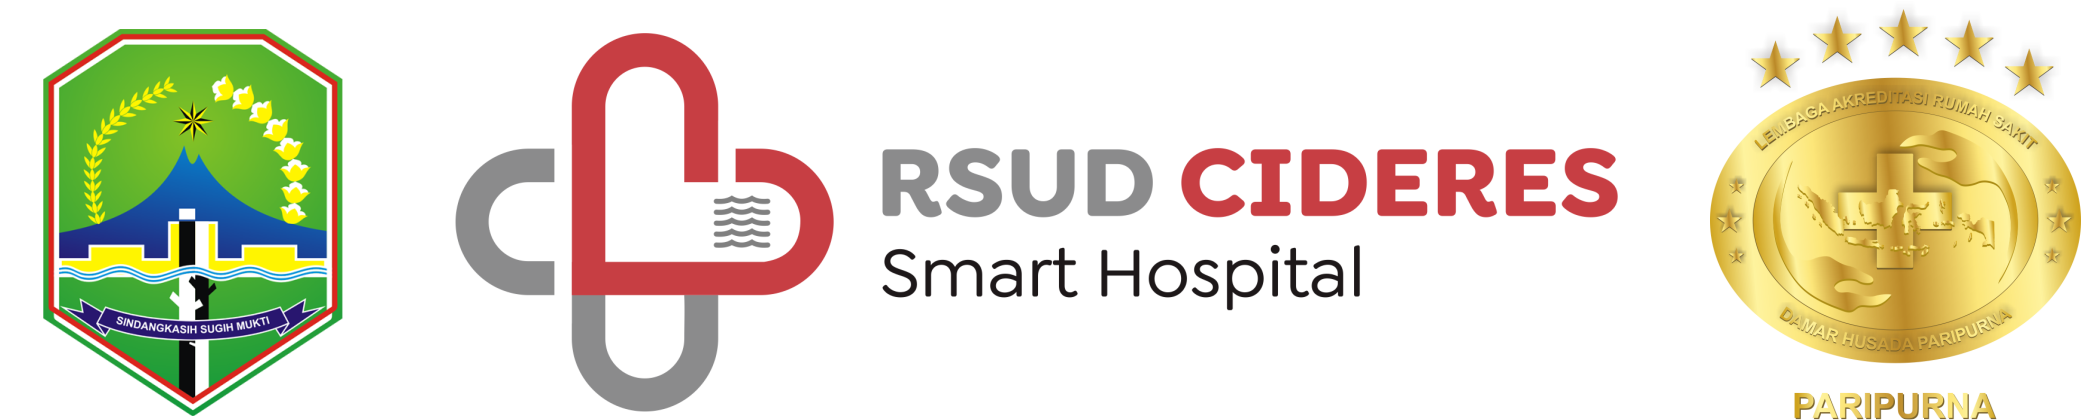 RSUD Cideres